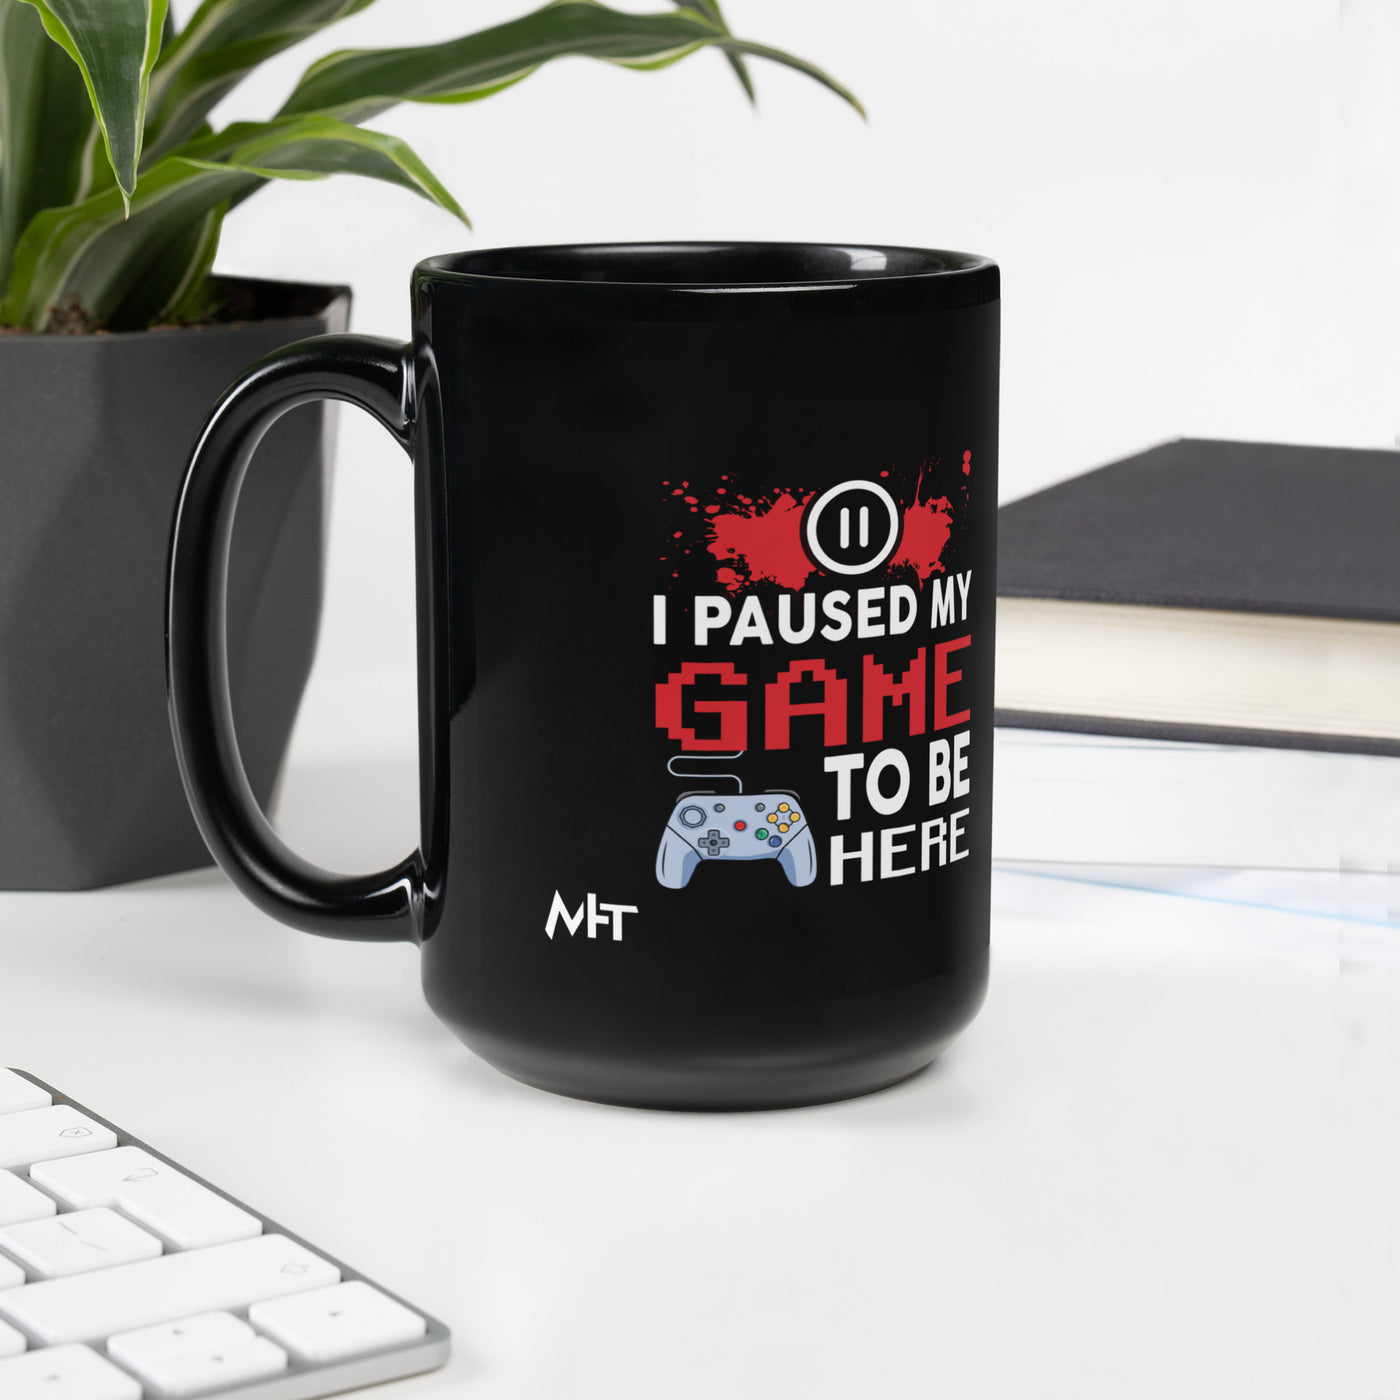 I Paused my Game to be here ( red pixelated text ) - Black Glossy Mug